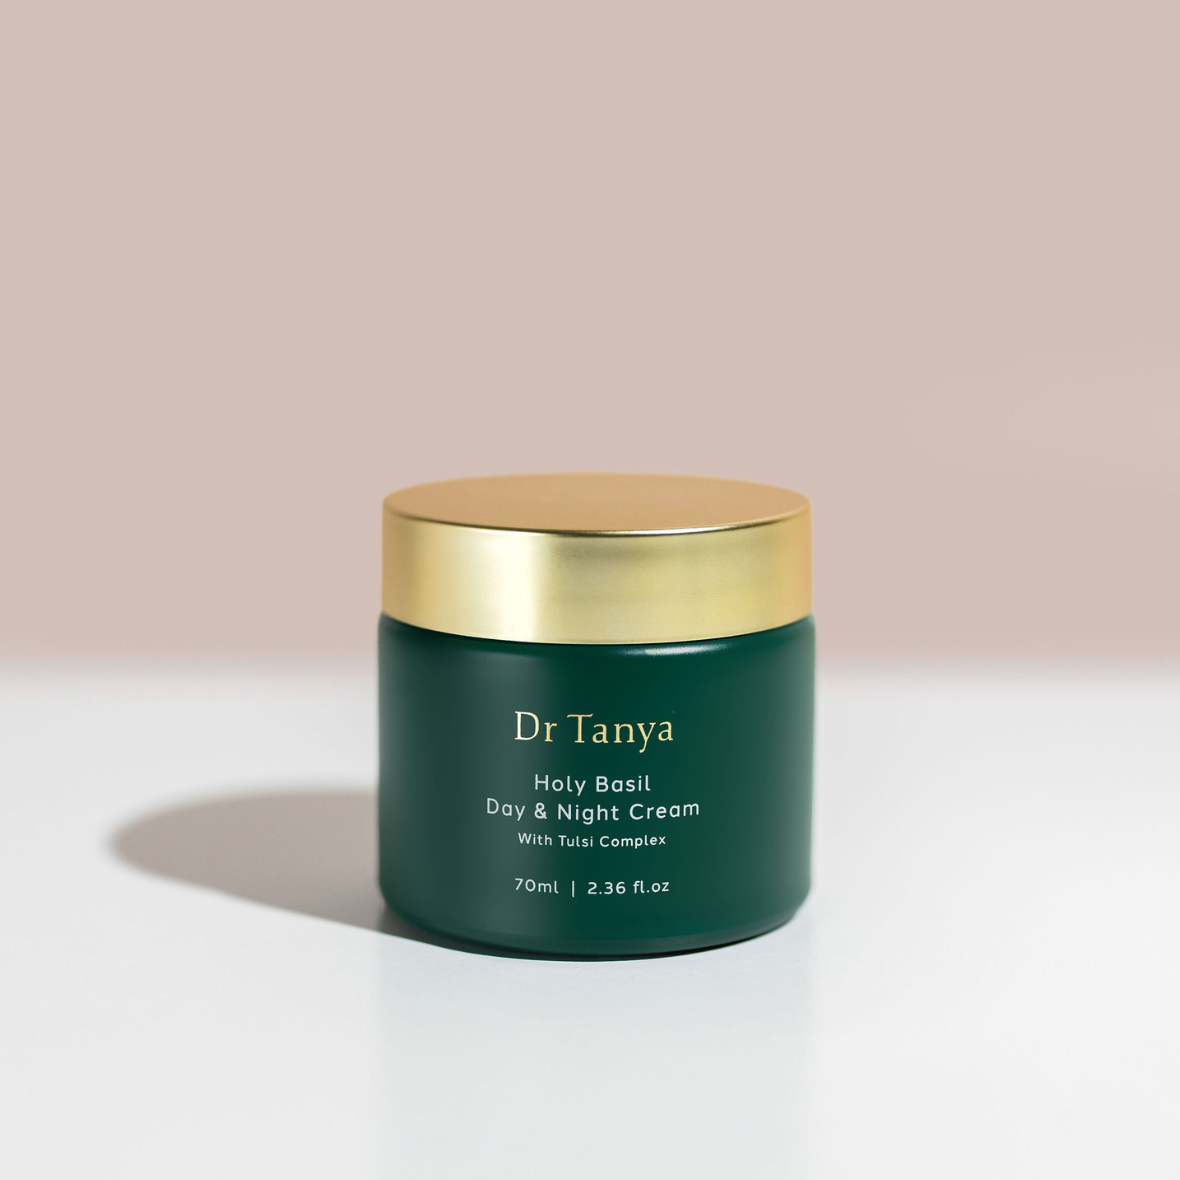 A round green pot of day and night cream with a gold lid against a pink backdrop